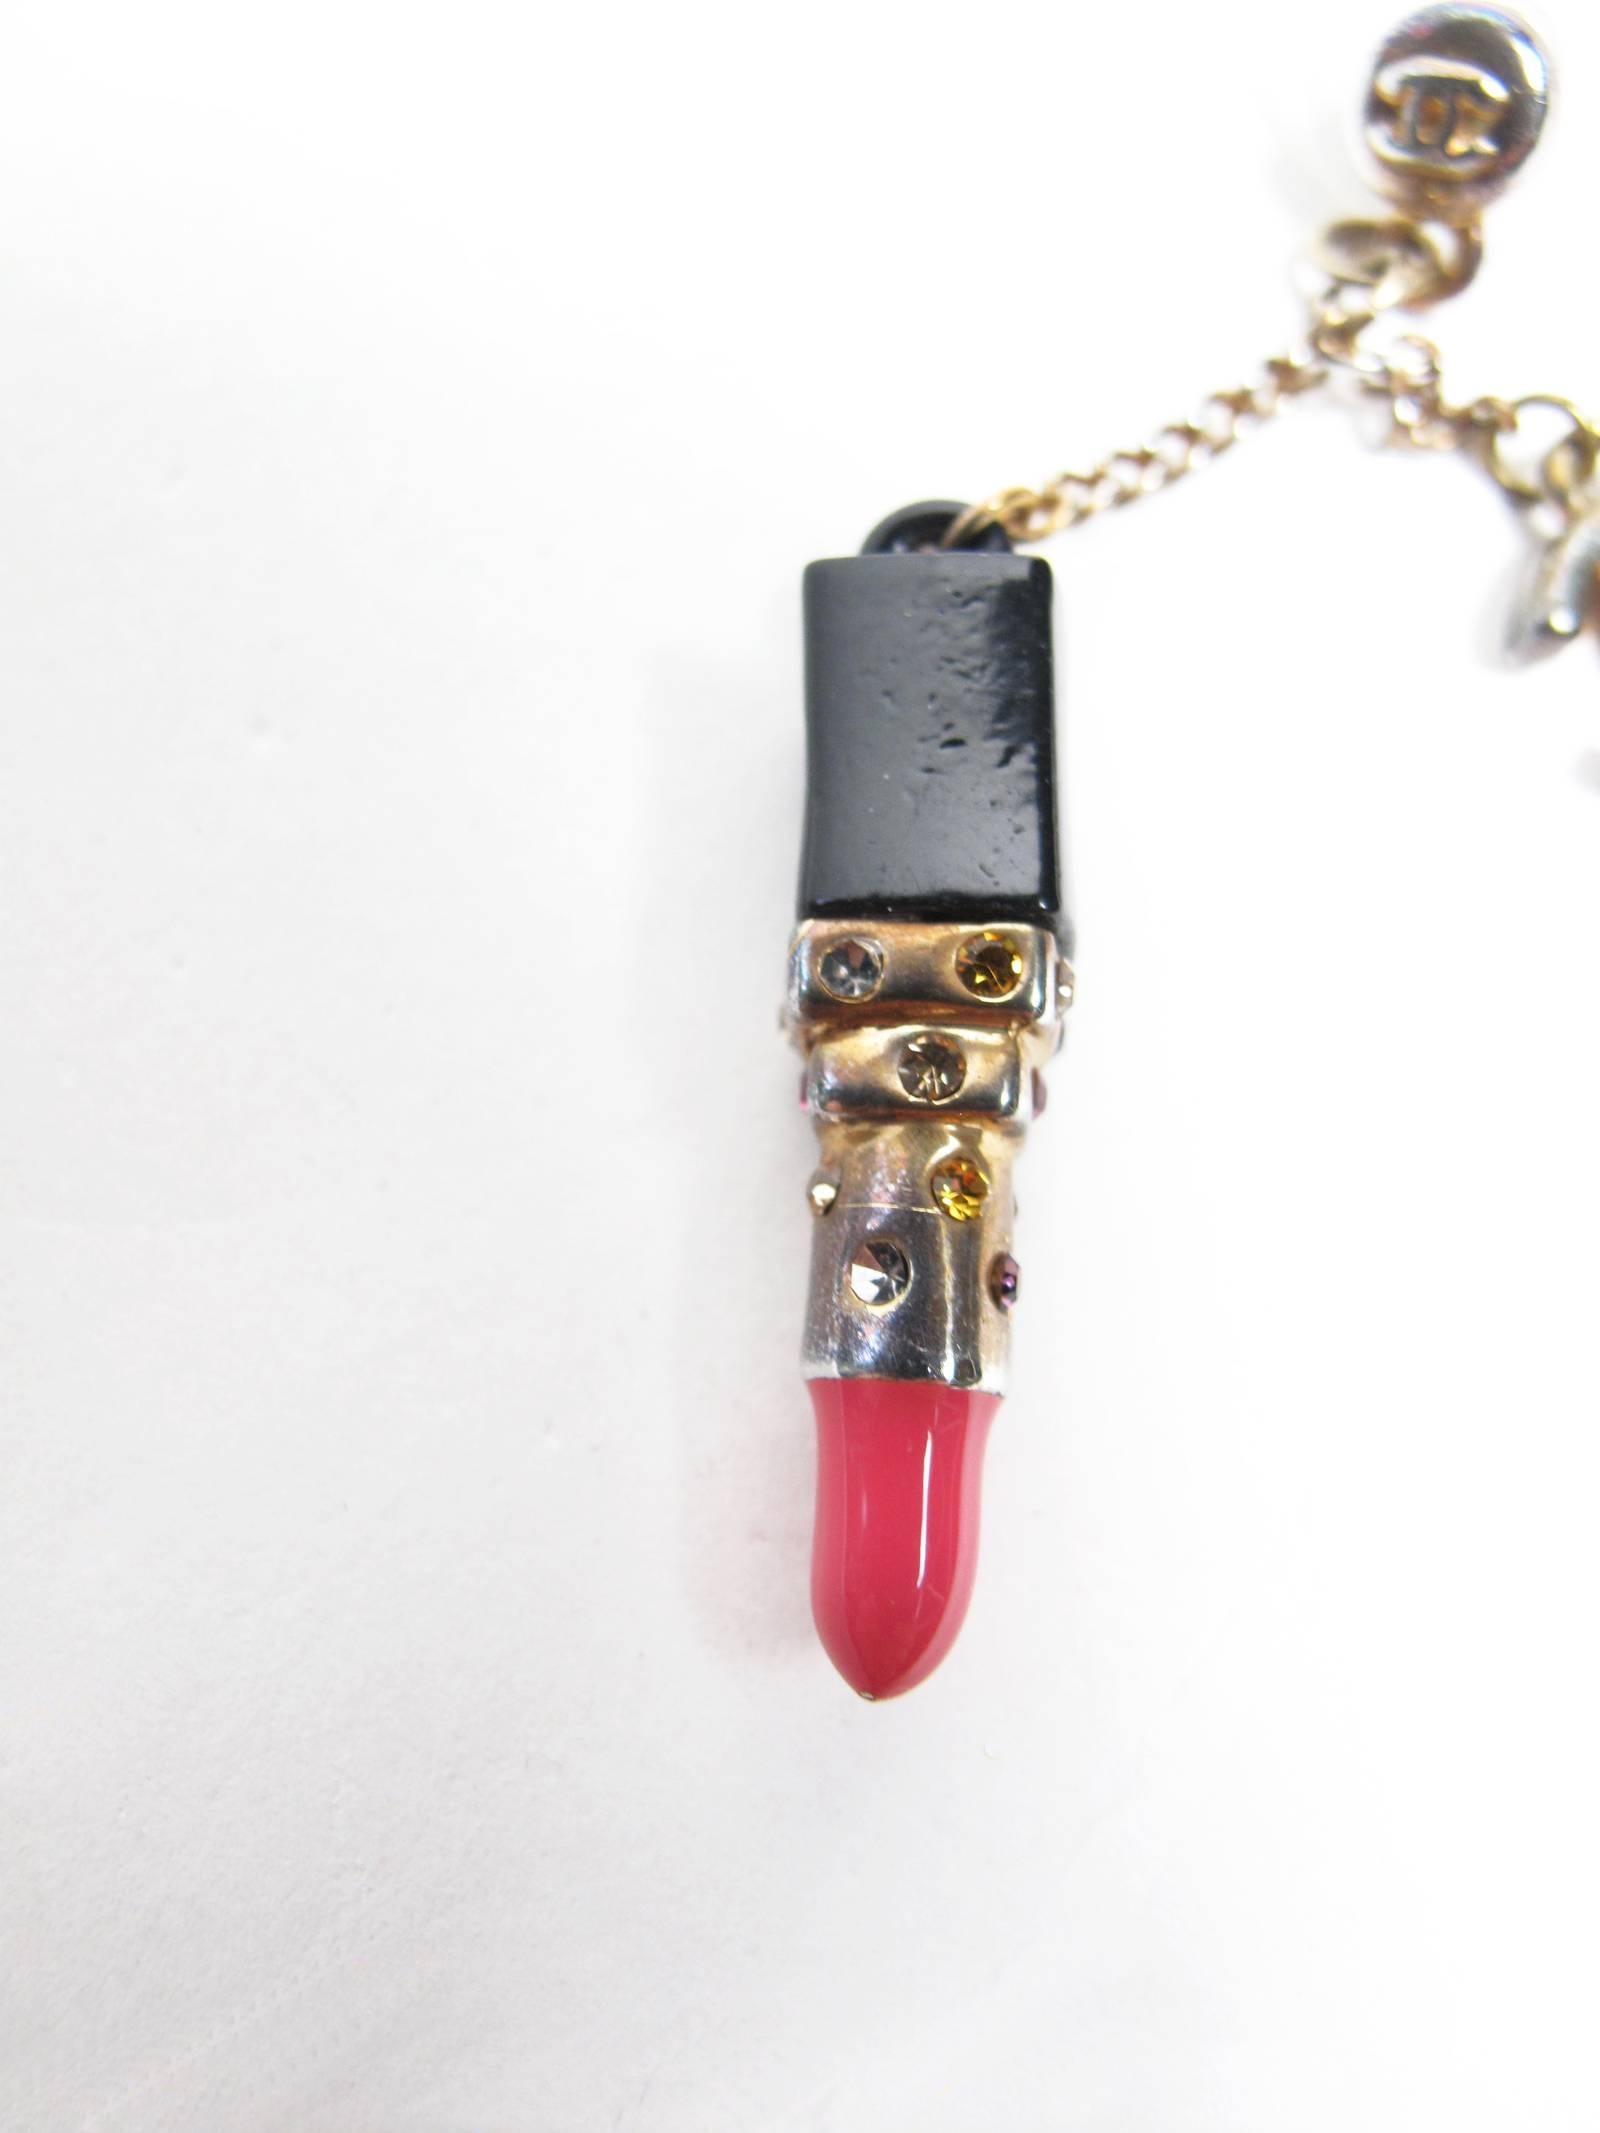 Chanel lipstick earrings. Condition: as is, some all over wear, see photos.  
2 1/4